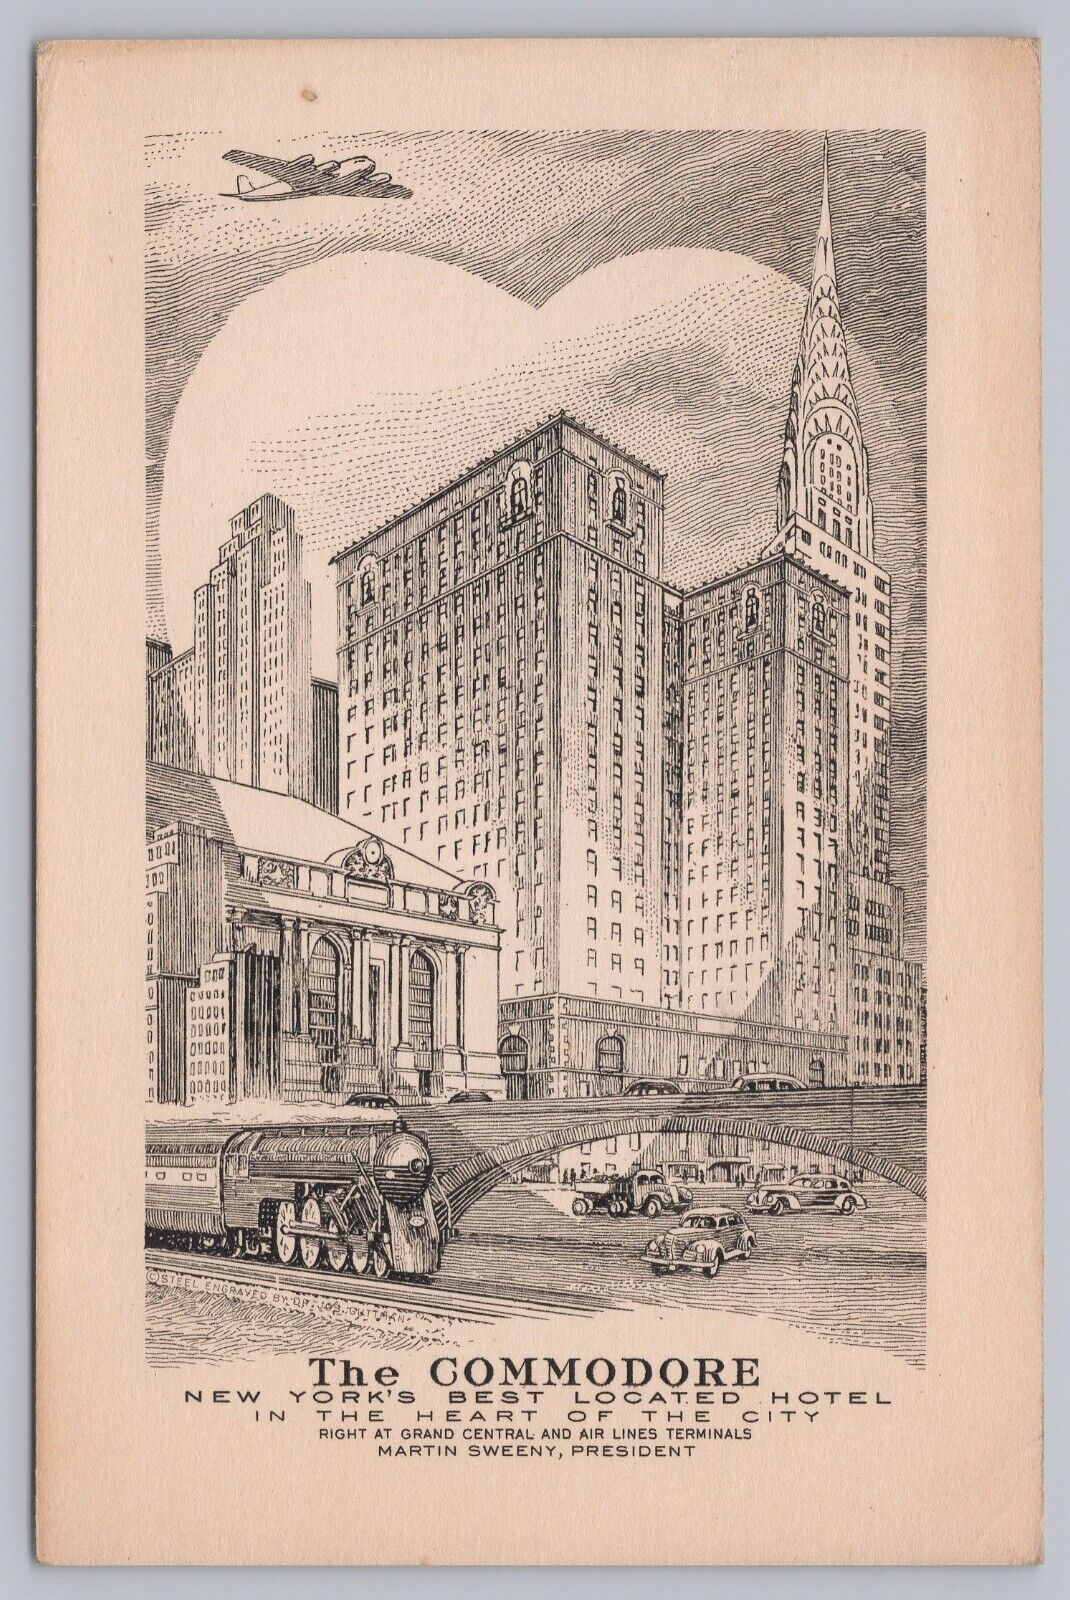 1943 The Commodore Hotel New York City Grand Central Station Vtg Postcard